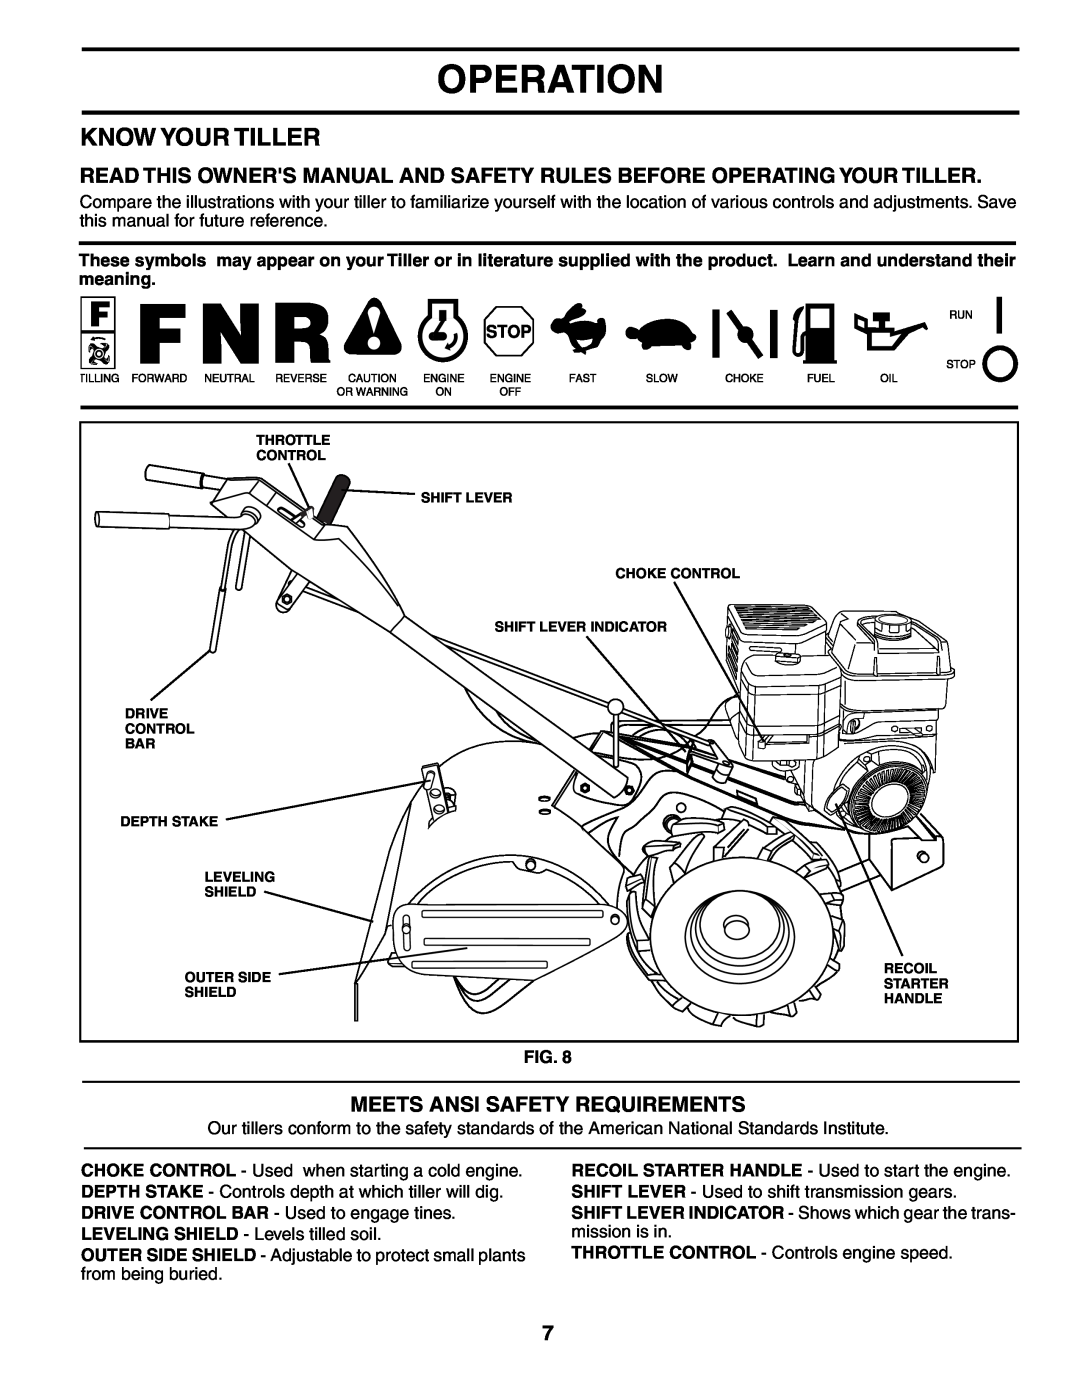 Husqvarna 650RTT owner manual Operation, Know Your Tiller, Meets Ansi Safety Requirements 